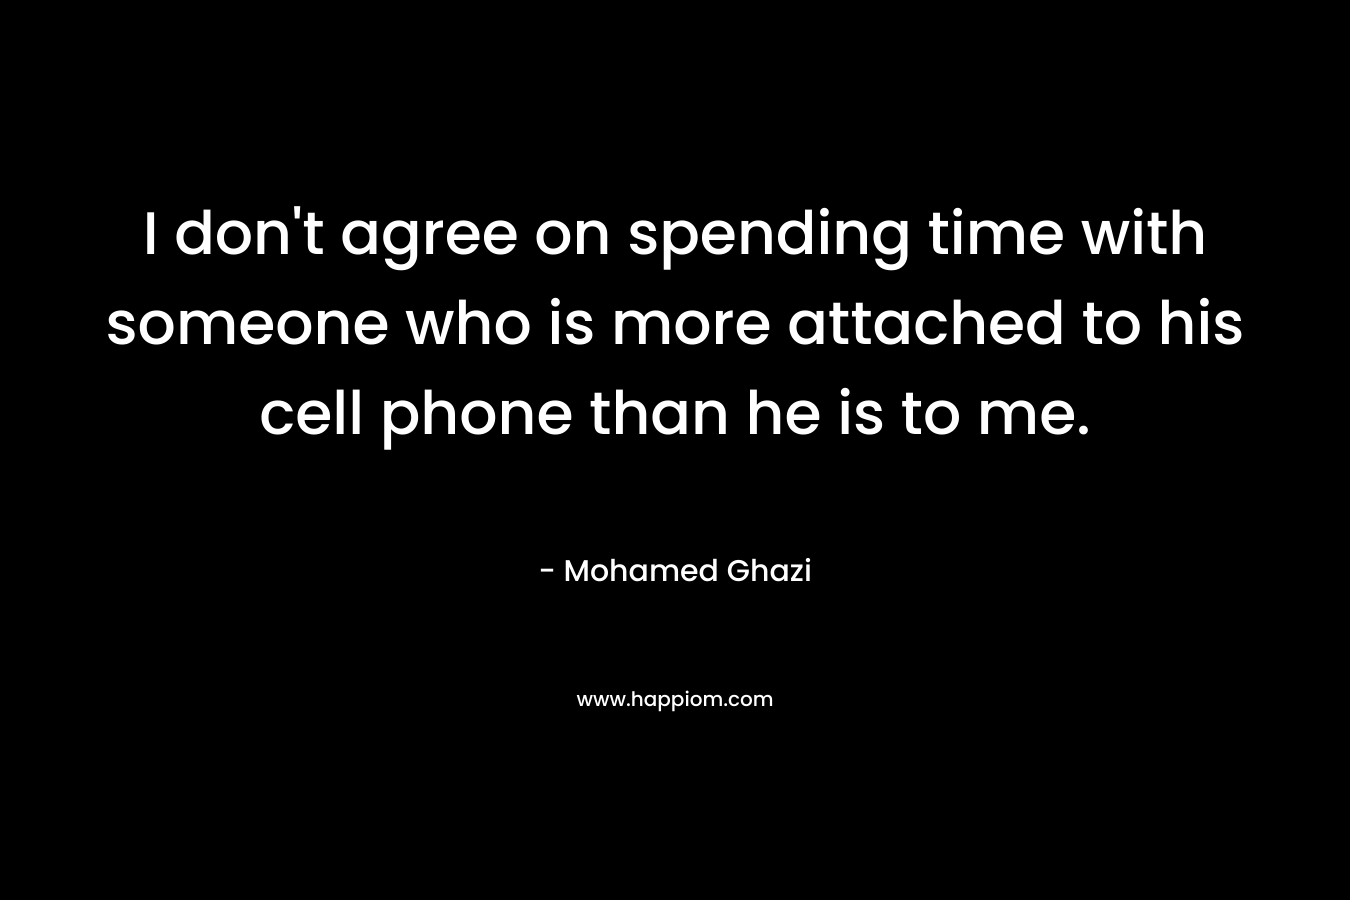 I don't agree on spending time with someone who is more attached to his cell phone than he is to me.